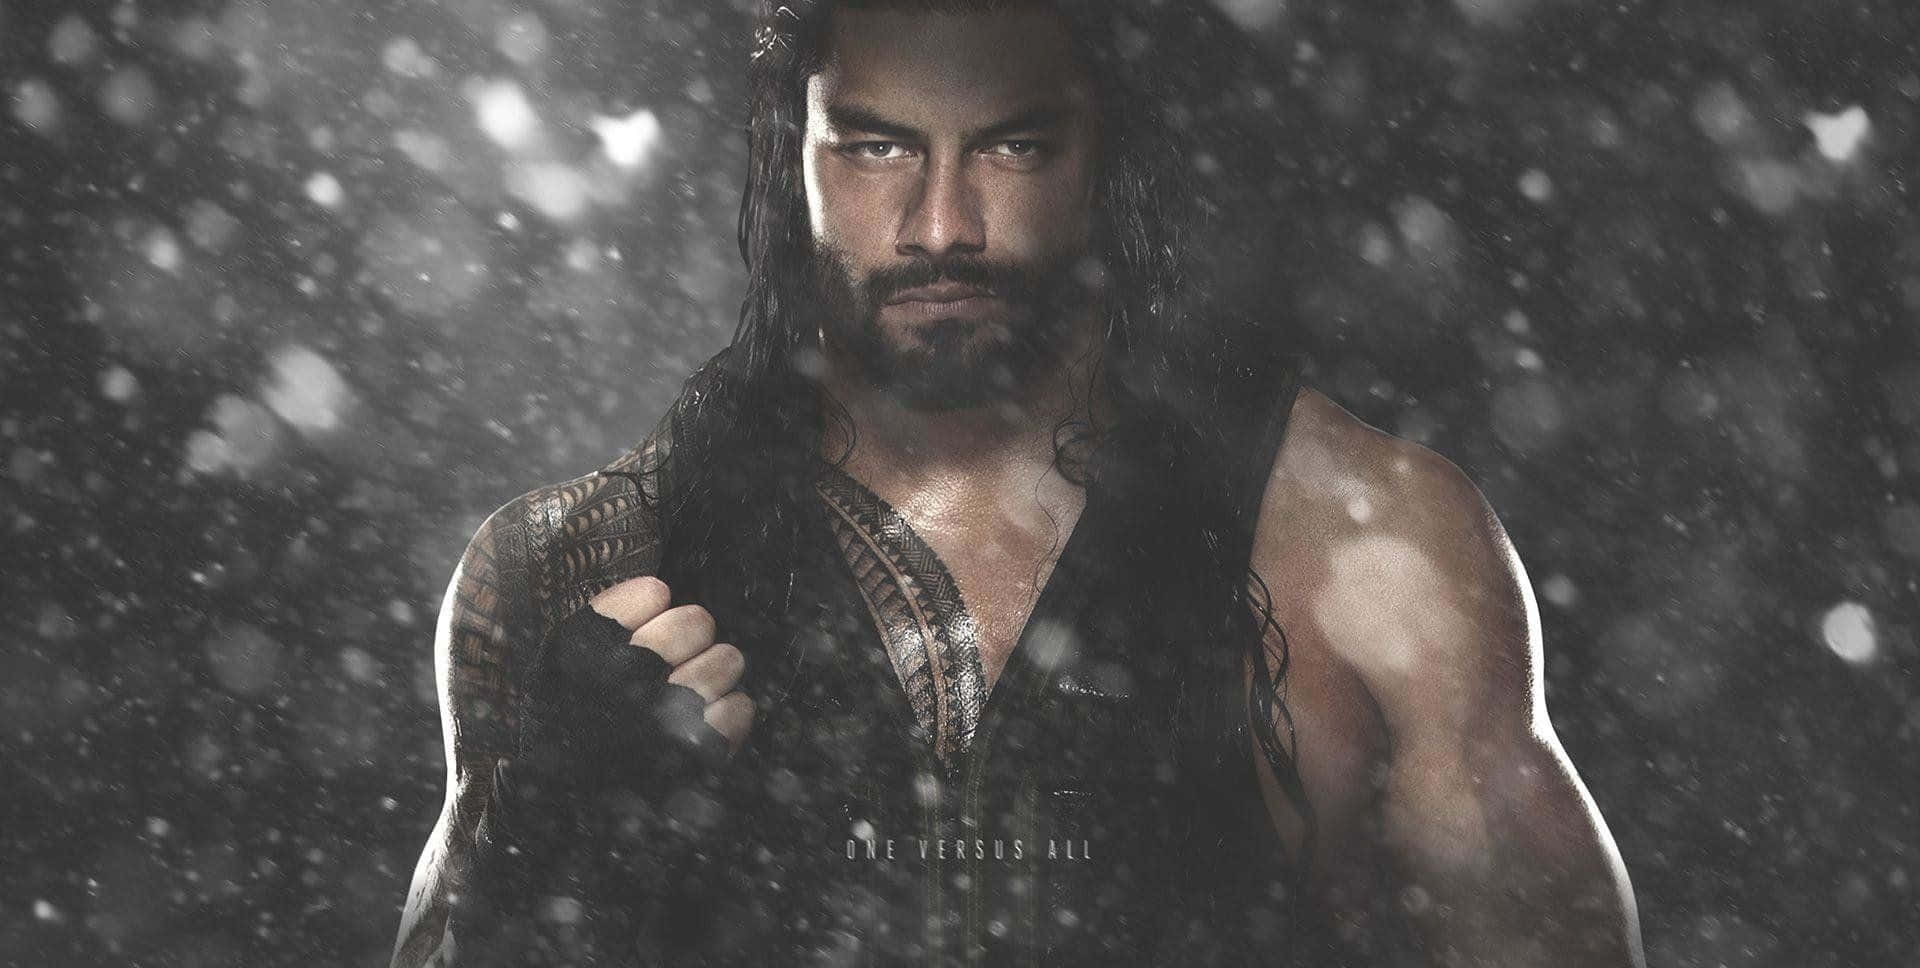 Roman Reigns is here to take the WWE by storm.